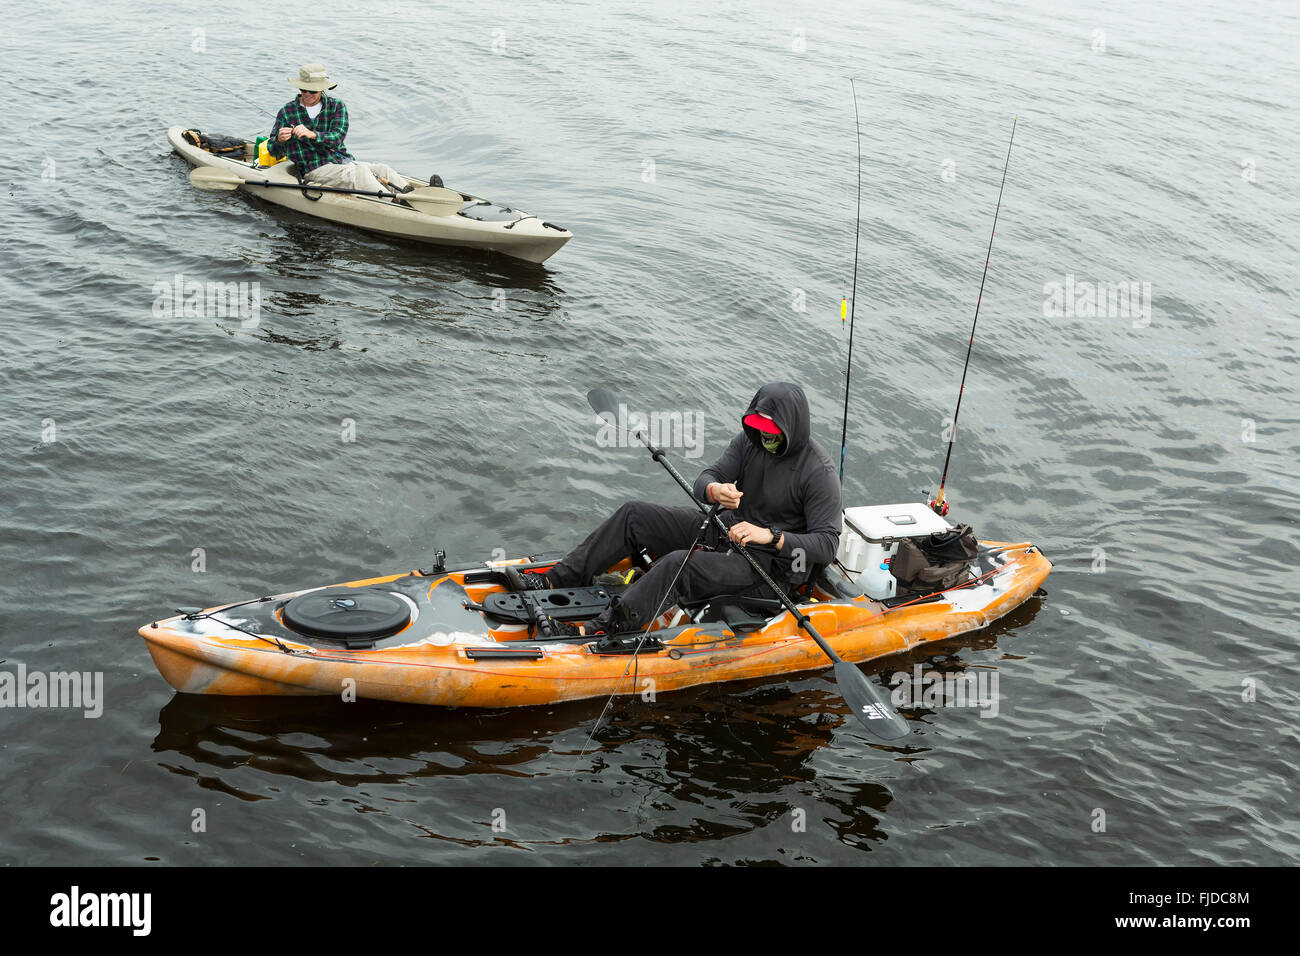 Men in two kayaks for fish in the sea, fishing from a kayak in a gloomy day at sea. Stock Photo